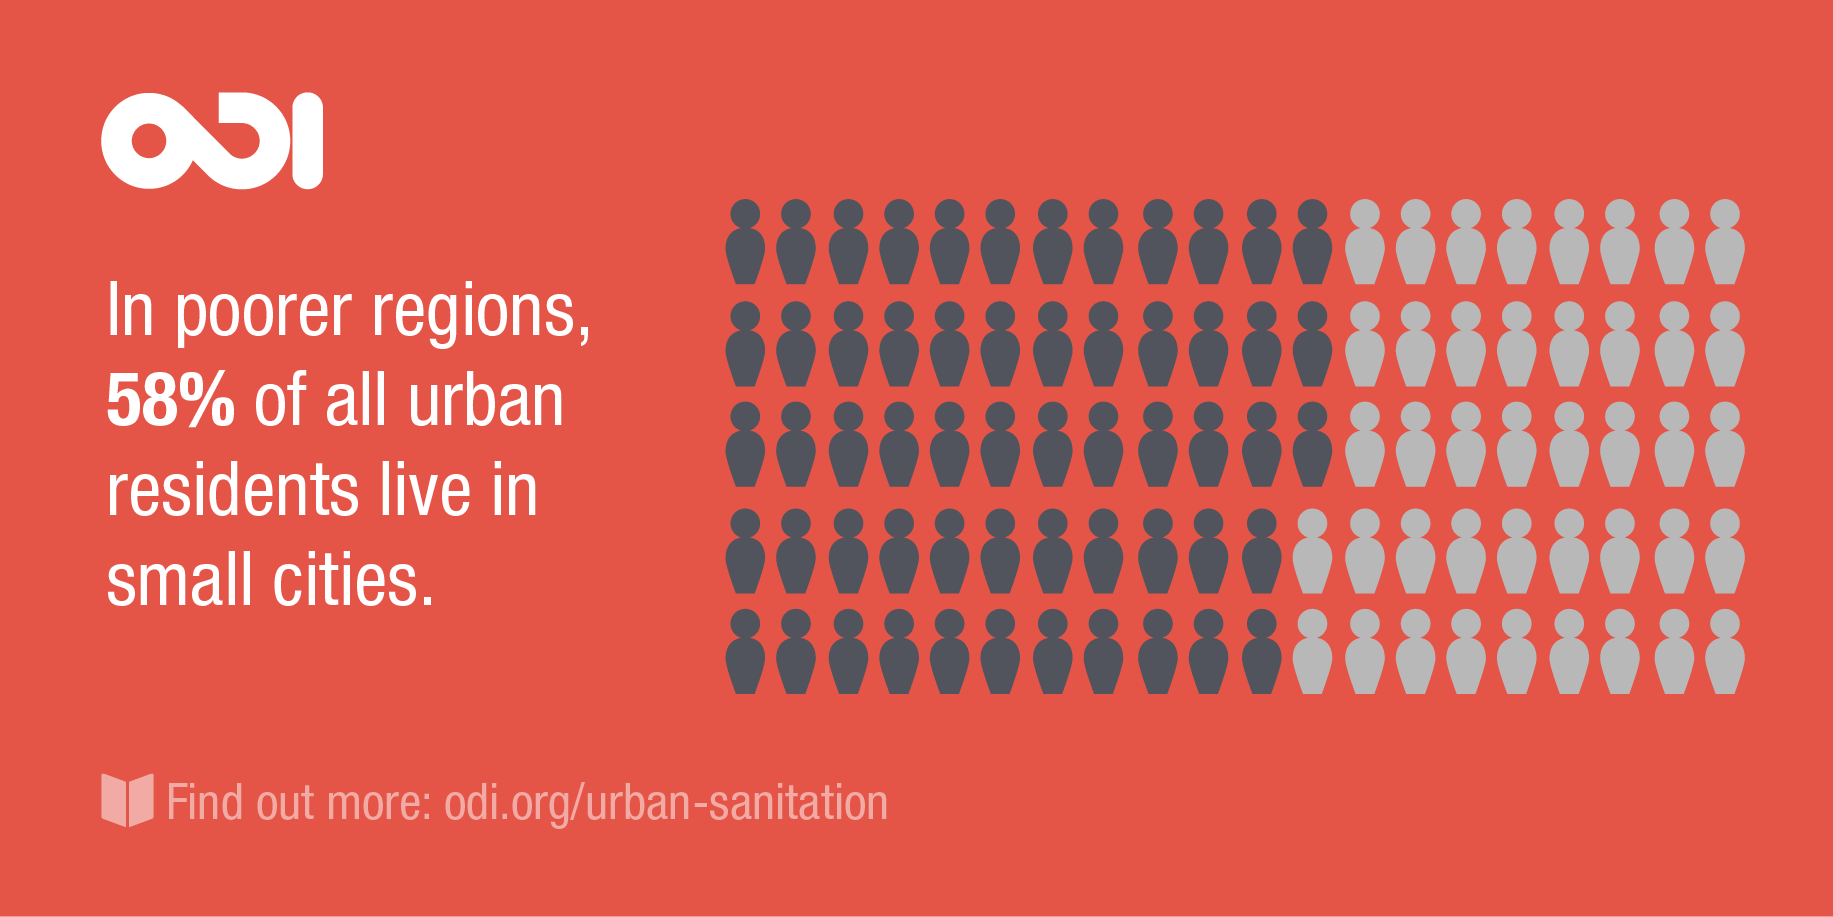 In poorer regions, 58% of all urban residents live in small cities.